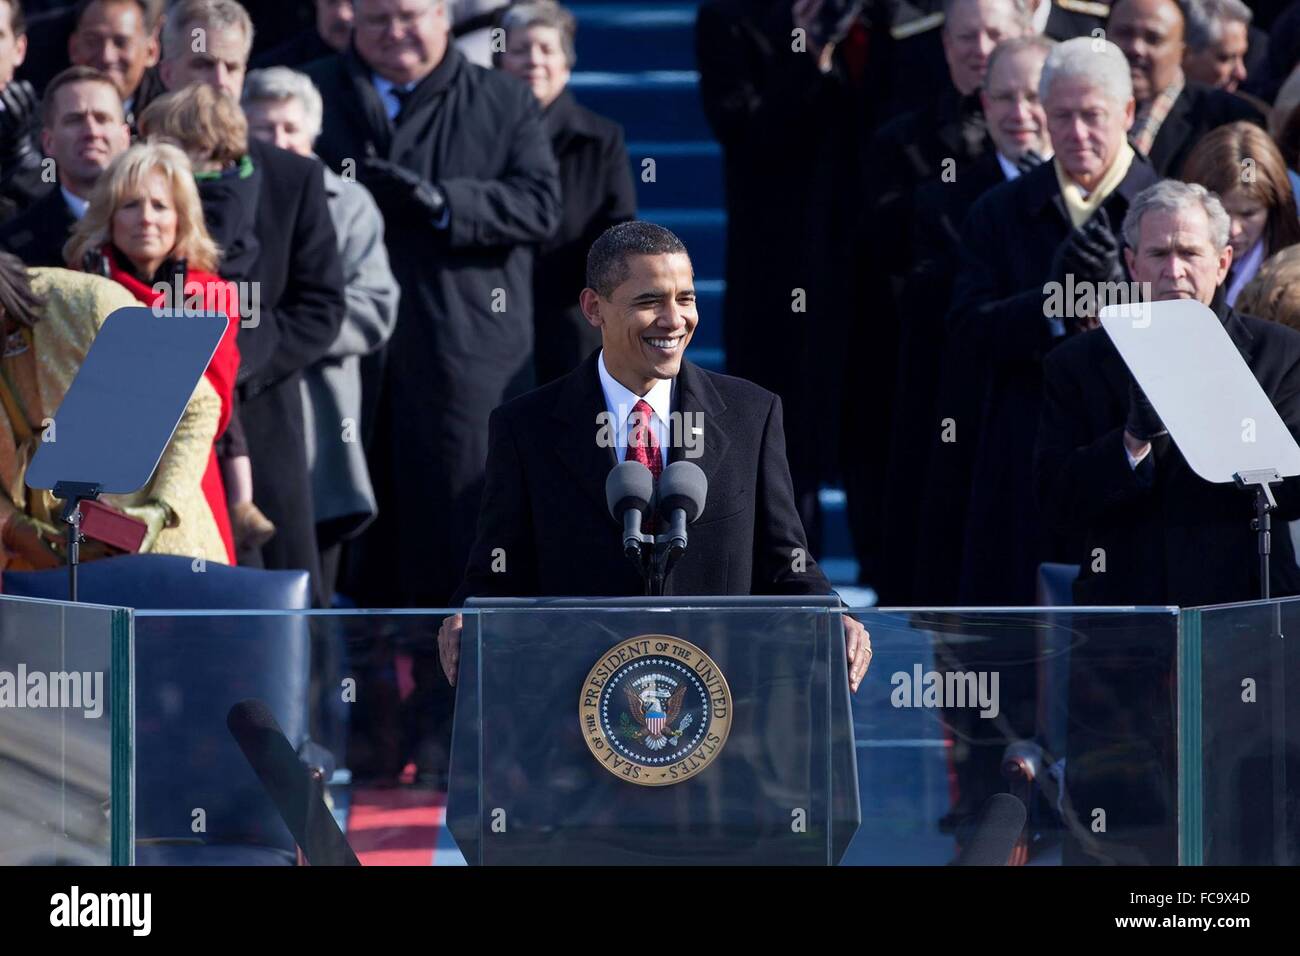 U.S President Barack Obama addresses the crowd during his acceptance speech at the 44th Presidential Inauguration at the U.S Capitol January 20, 2009 in Washington, DC. Stock Photo